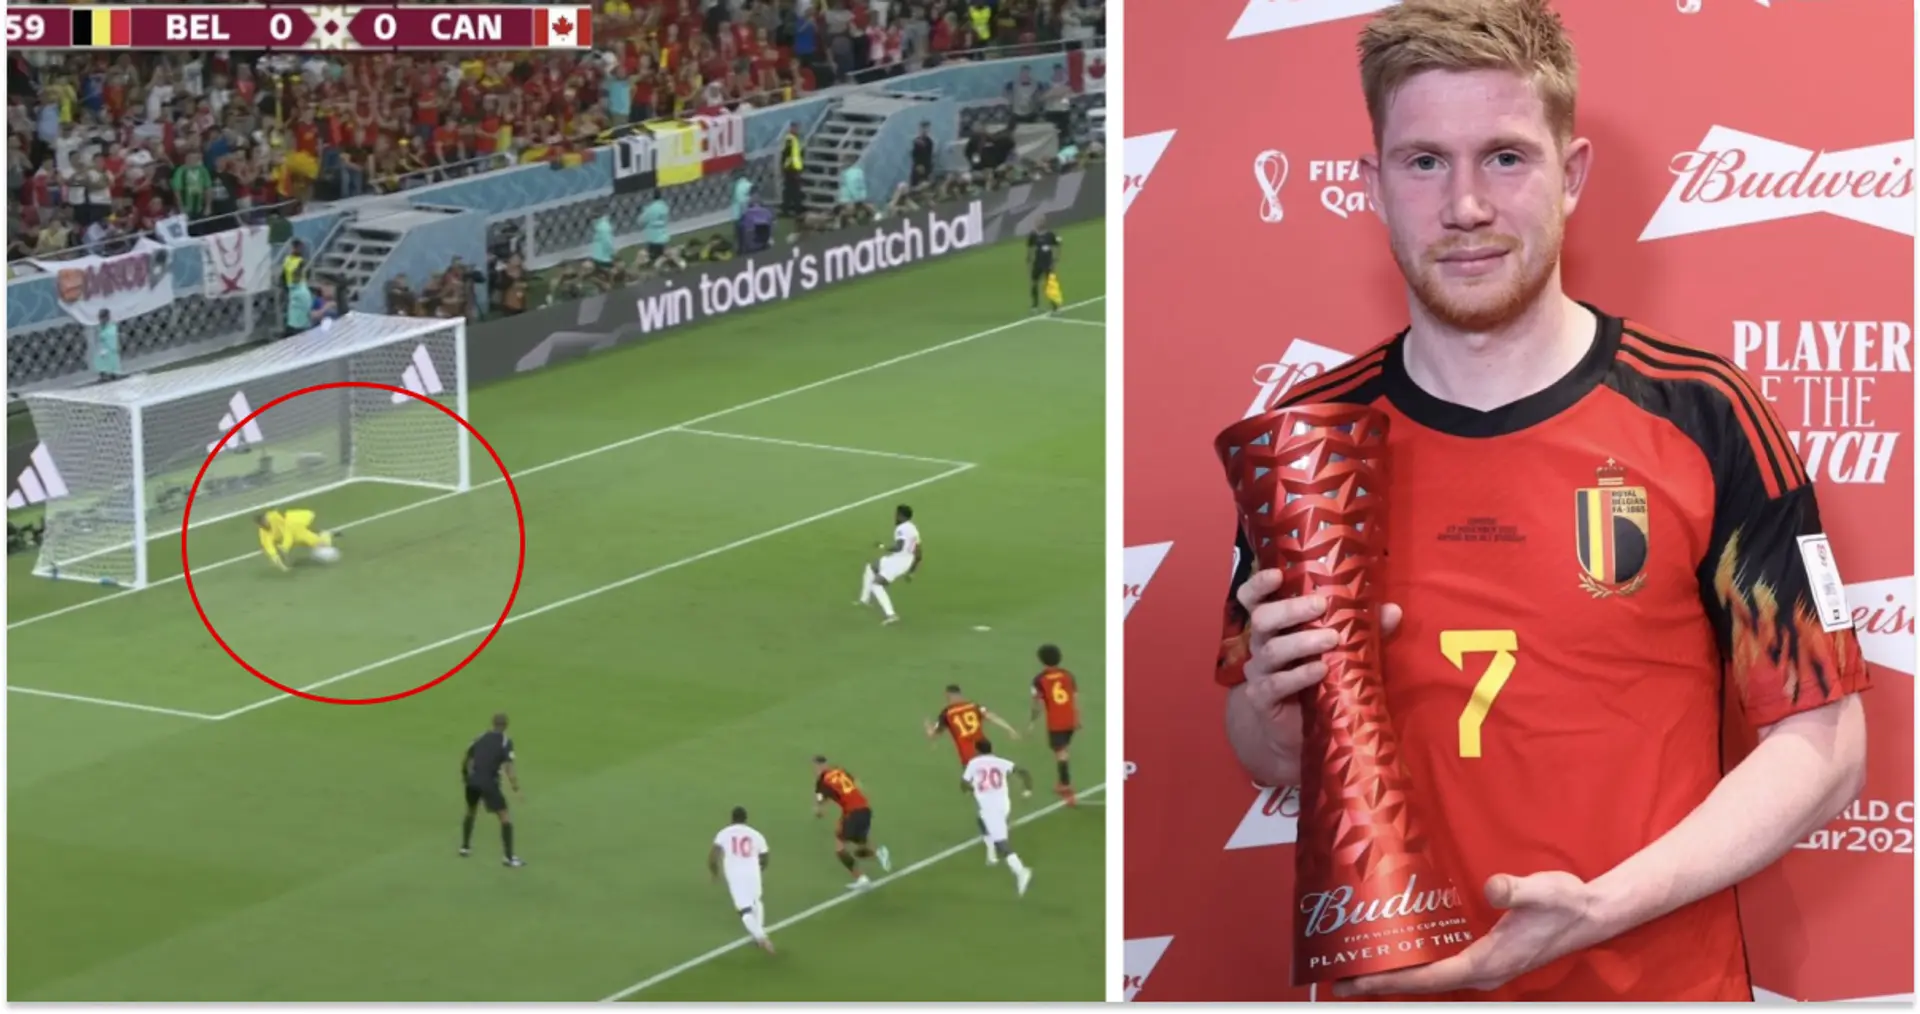 'I don't know why': De Bruyne brutally honest after he receives Man of the Match award over Courtois